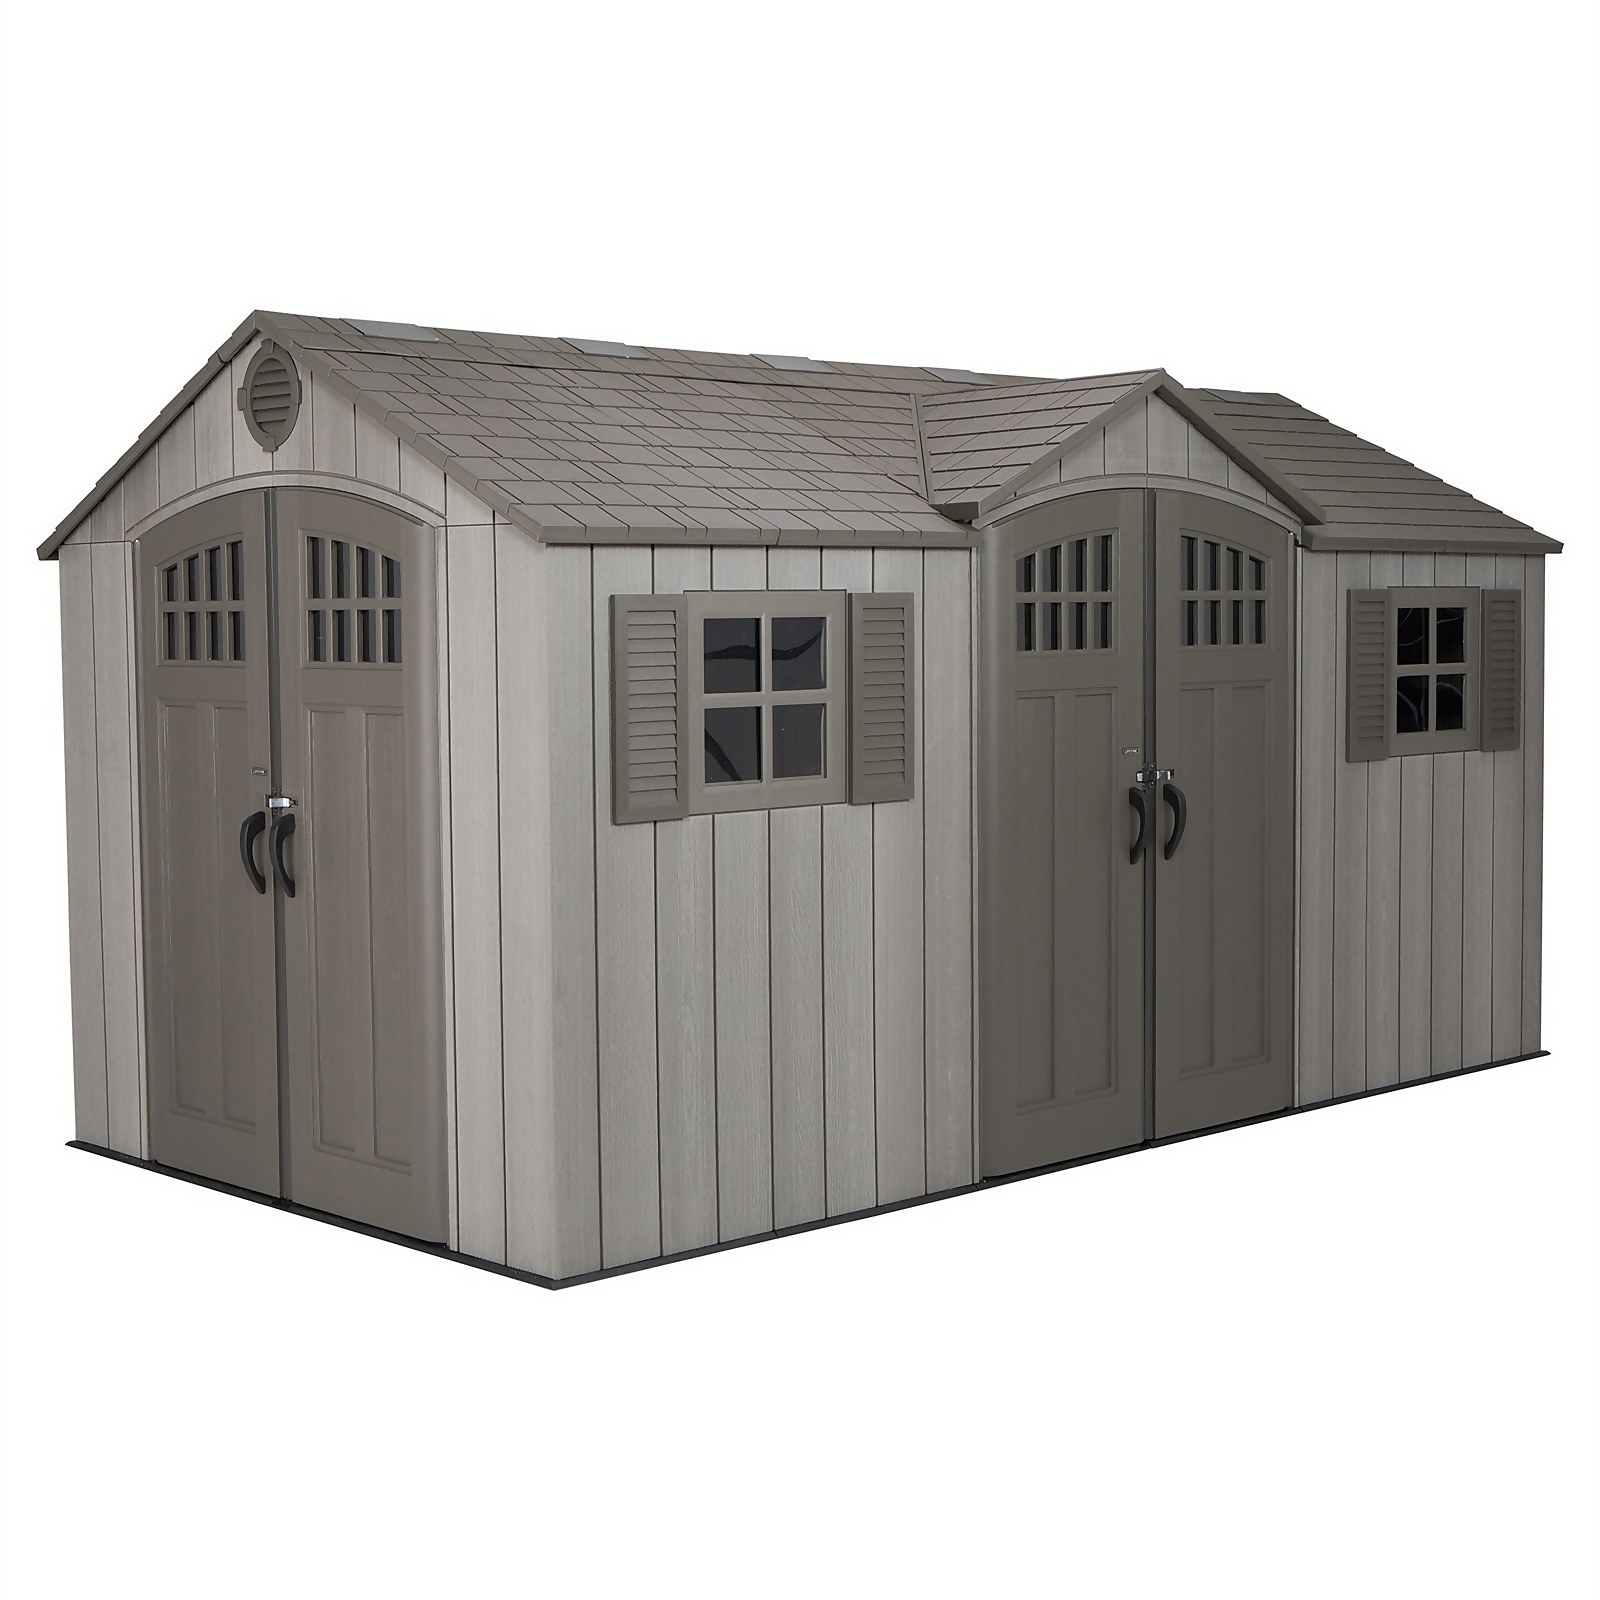 Photo of Lifetime 15 X 8ft Rough Cut Dual Entry Outdoor Storage Shed - Installation Included